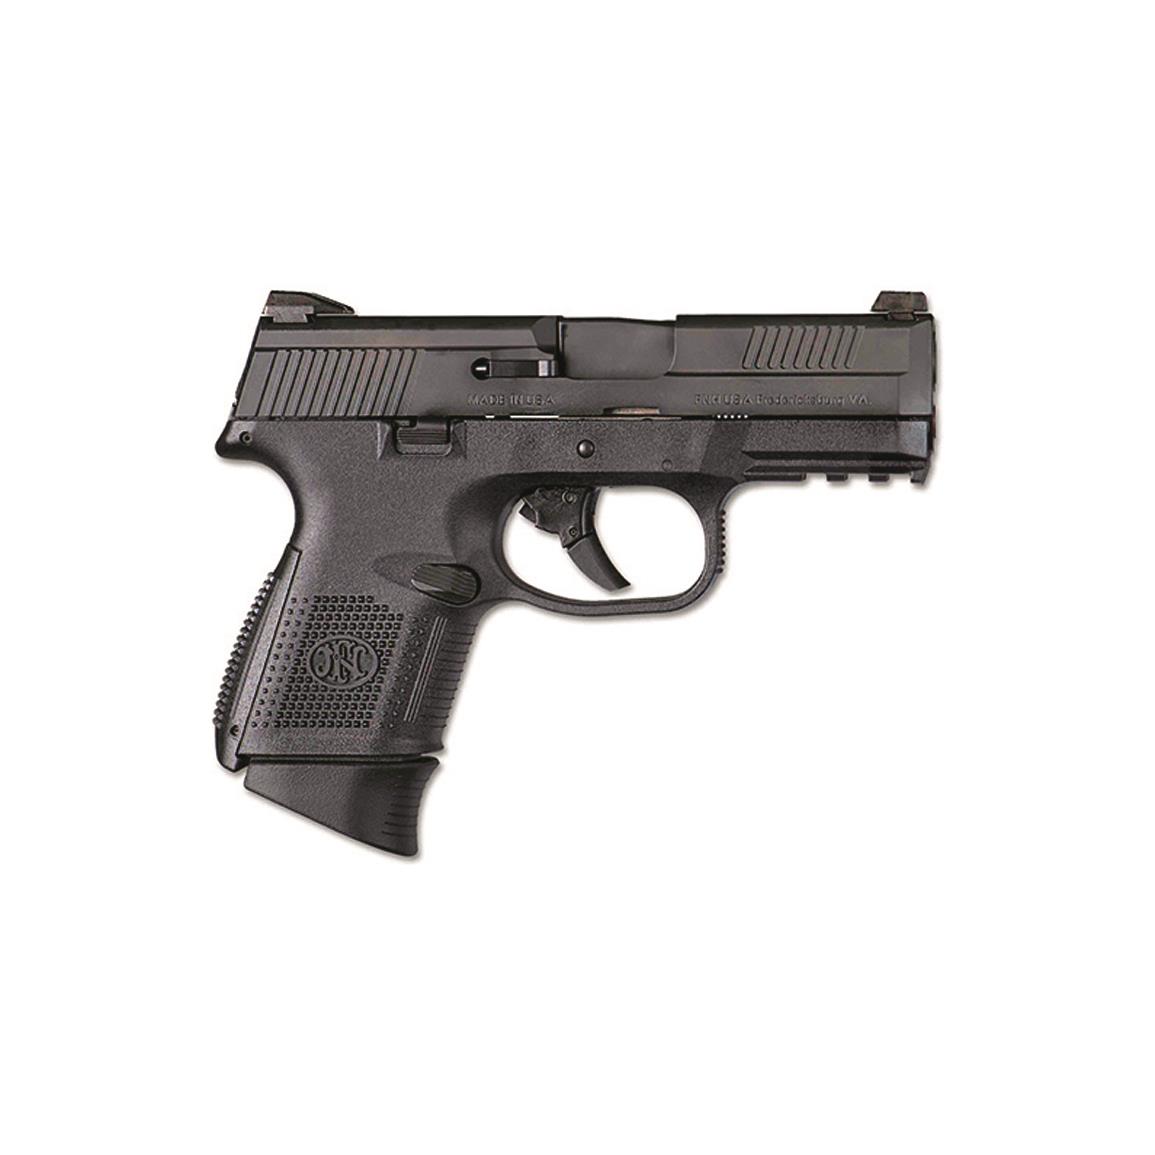 FN America FNS-40 Compact, Semi-Automatic, .40 Smith & Wesson, 3.6" Barrel, 10+1/14+1 Rounds